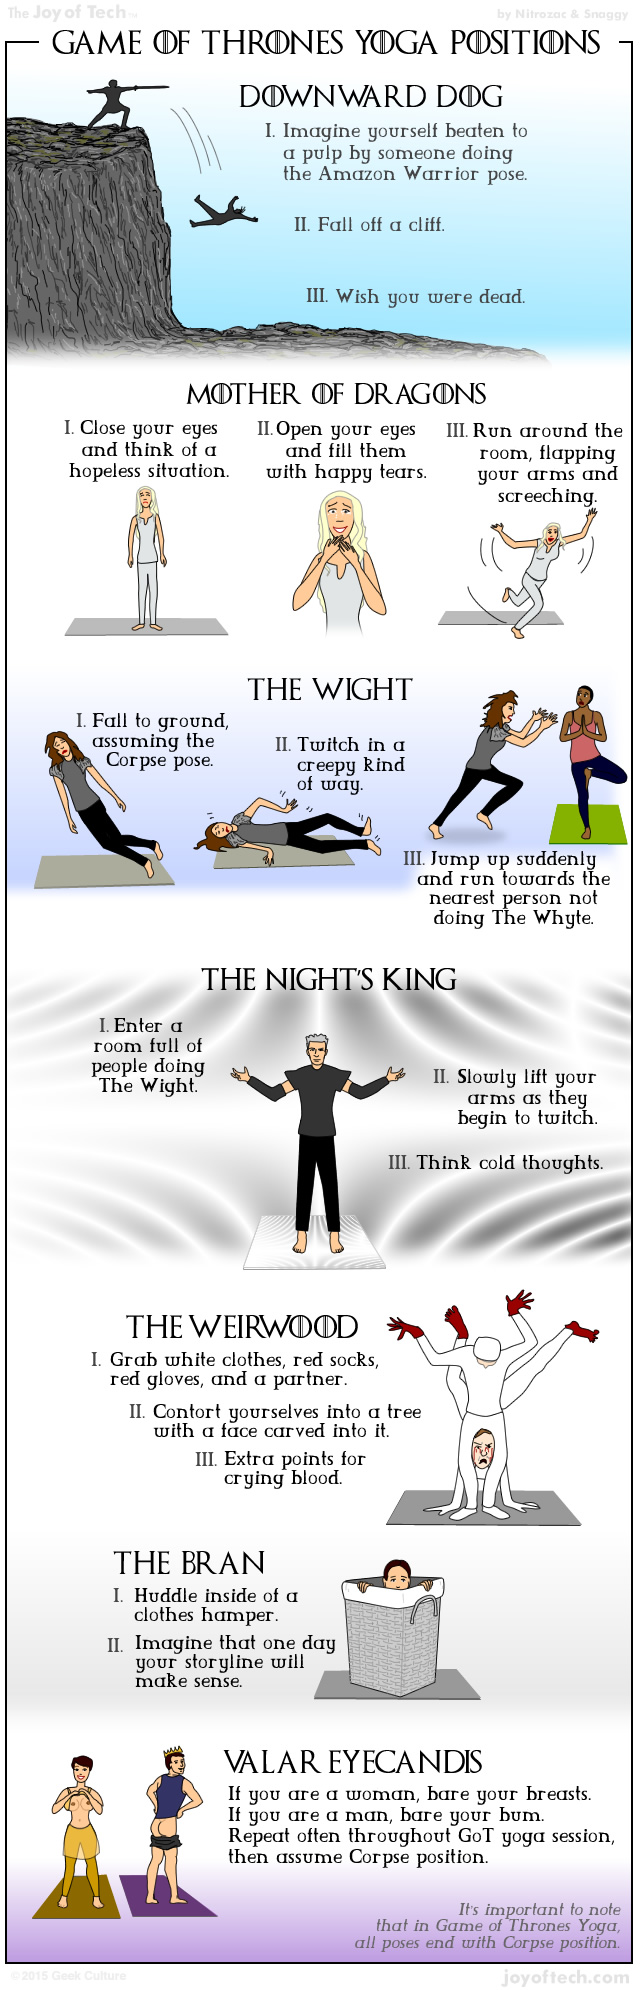 Game of Thrones Yoga!